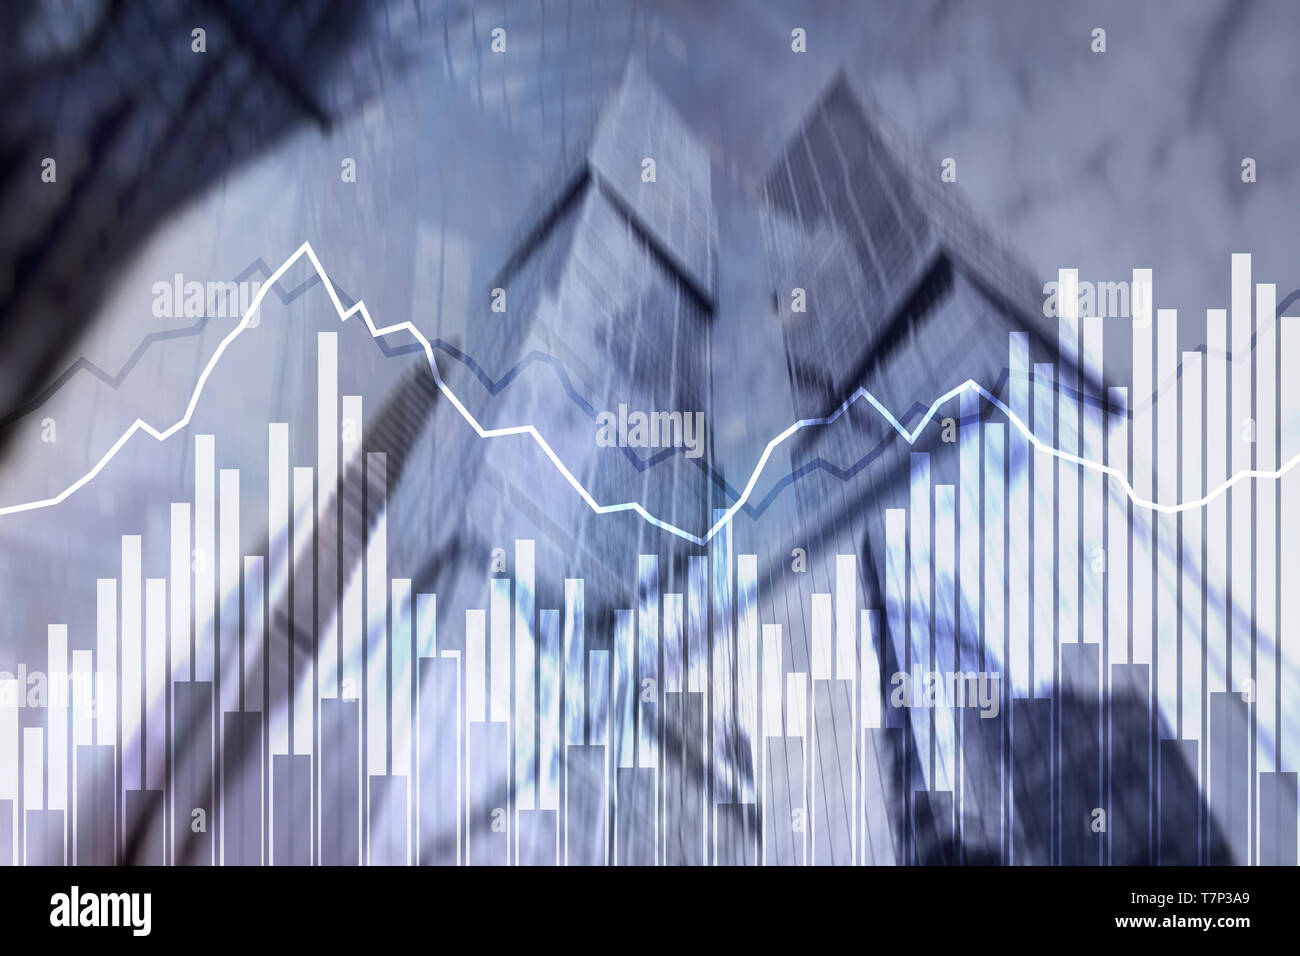 Double exposure Financial graphs and diagrams. Business, economics and investment concept. Stock Photo